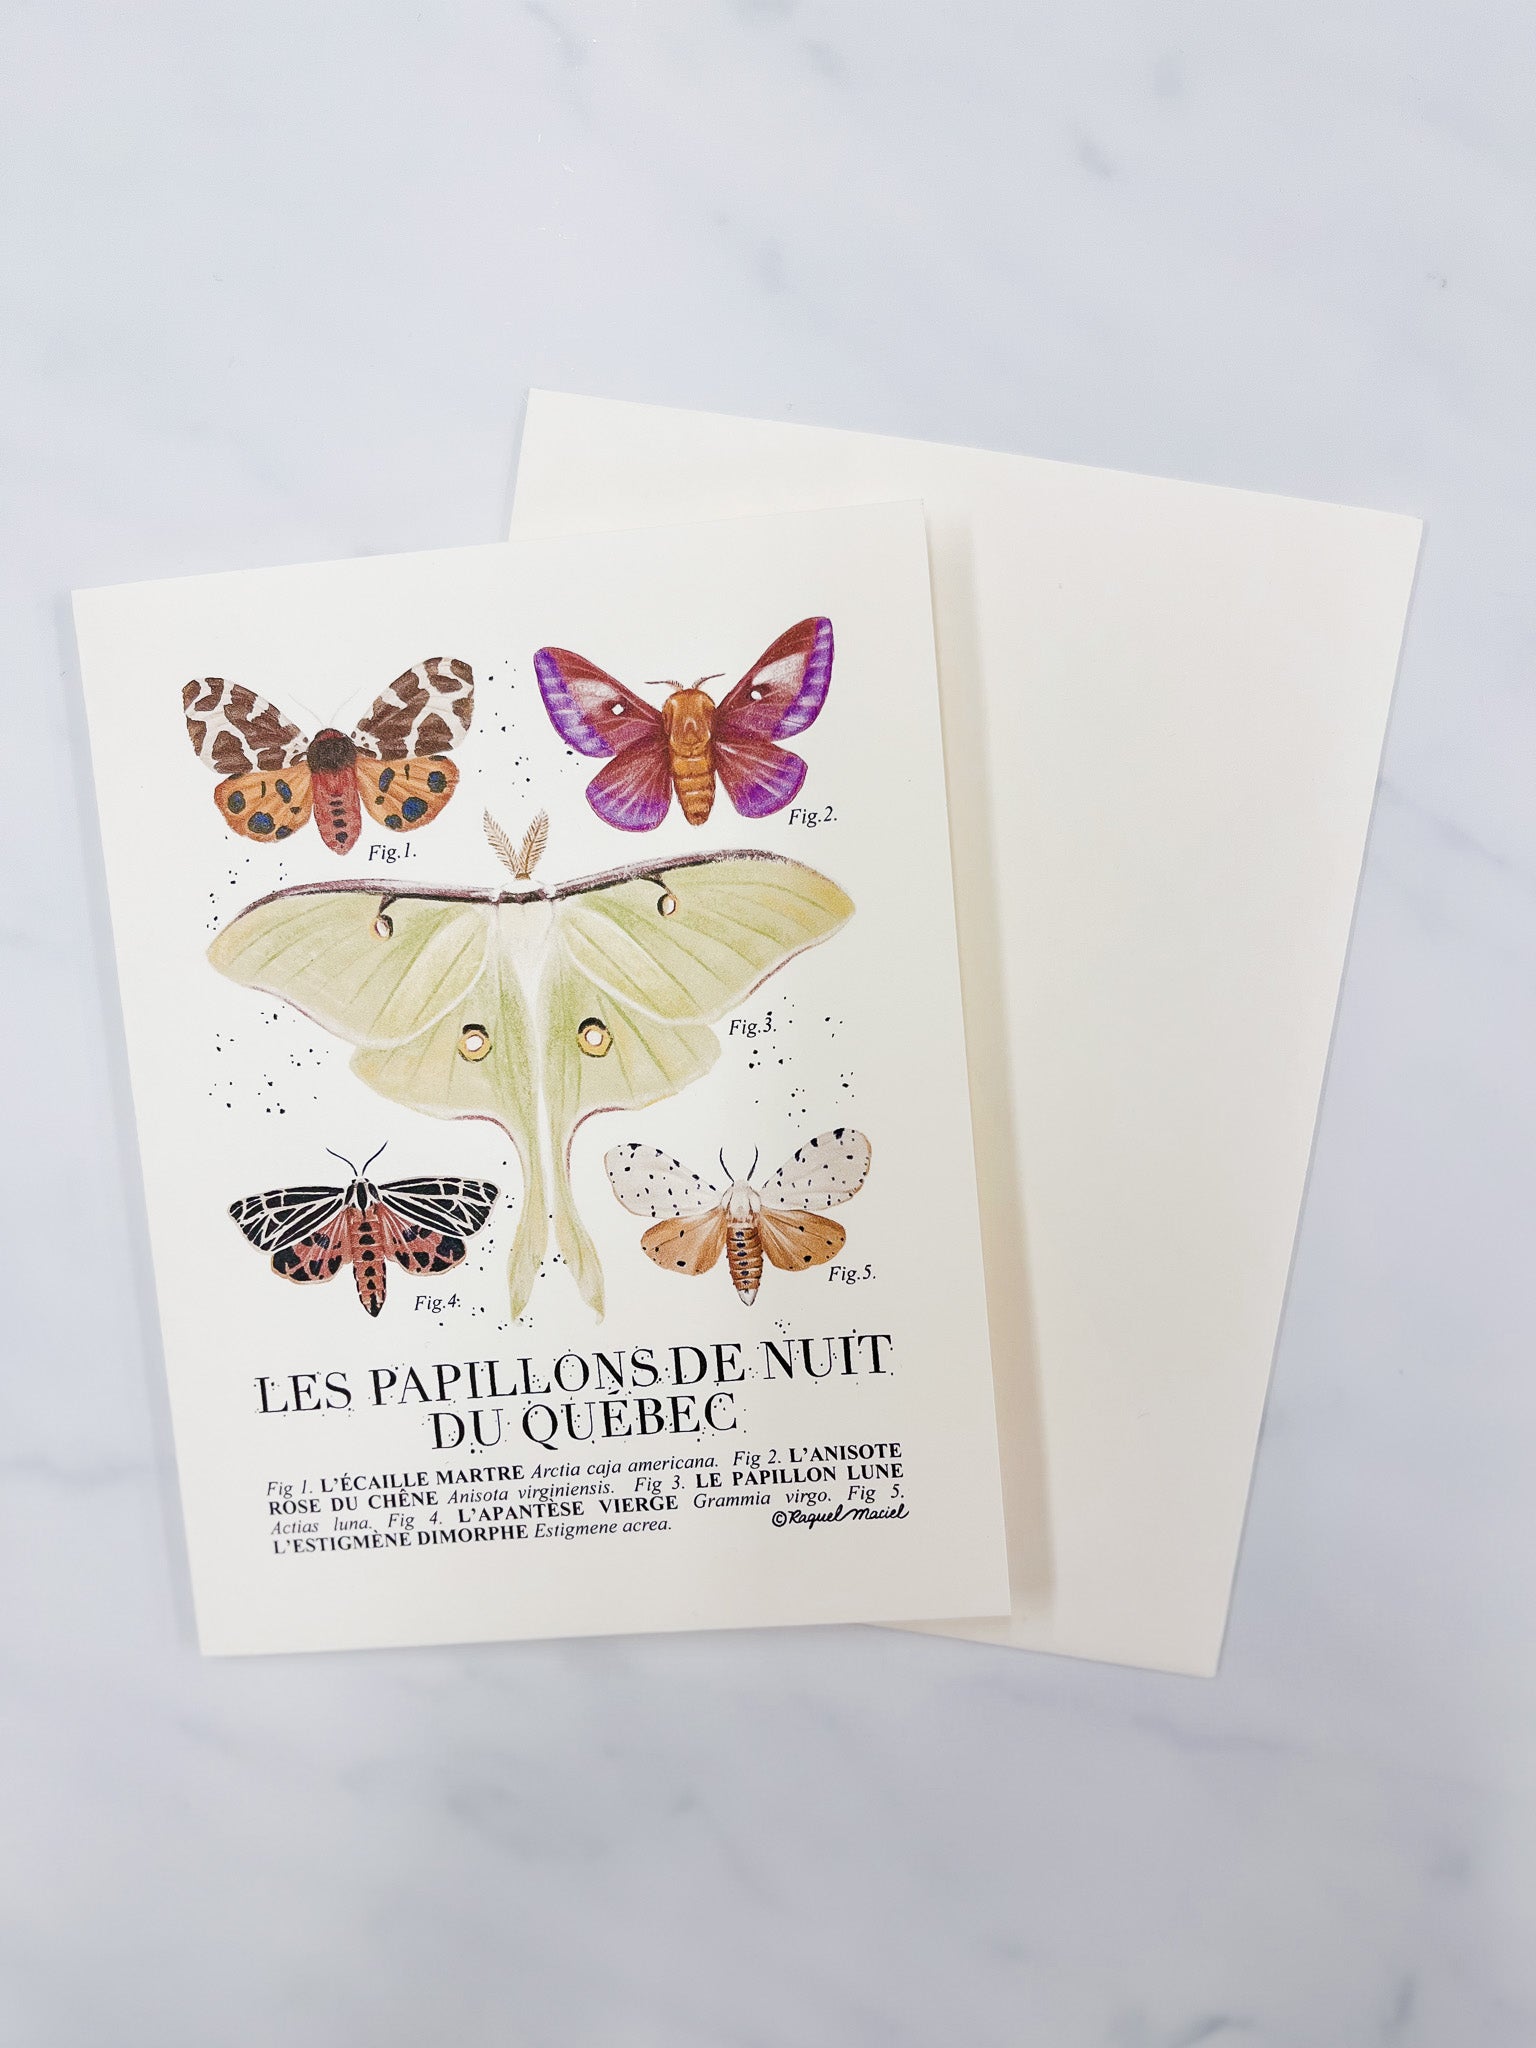 Beige card with illustrations of Quebec moths and matching beige envelope